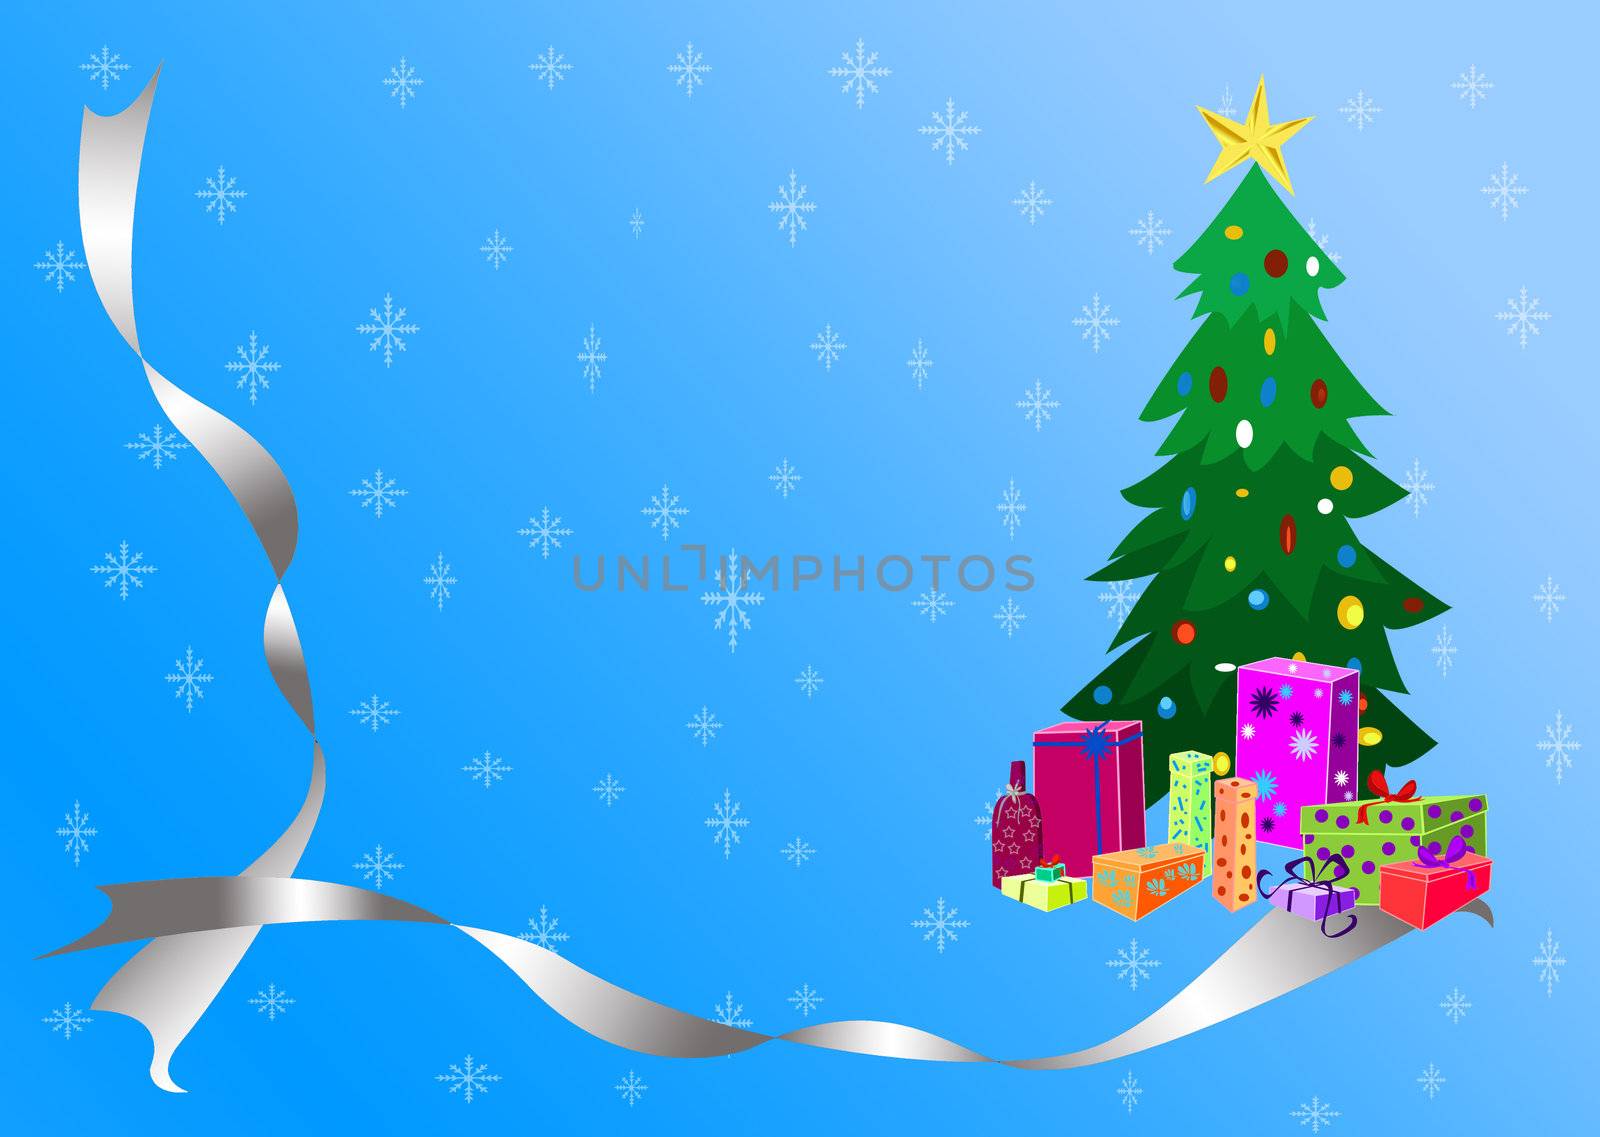 Fun Christmas card background with silver ribbons a Christmas tree and many gifts of all shapes and sizes.